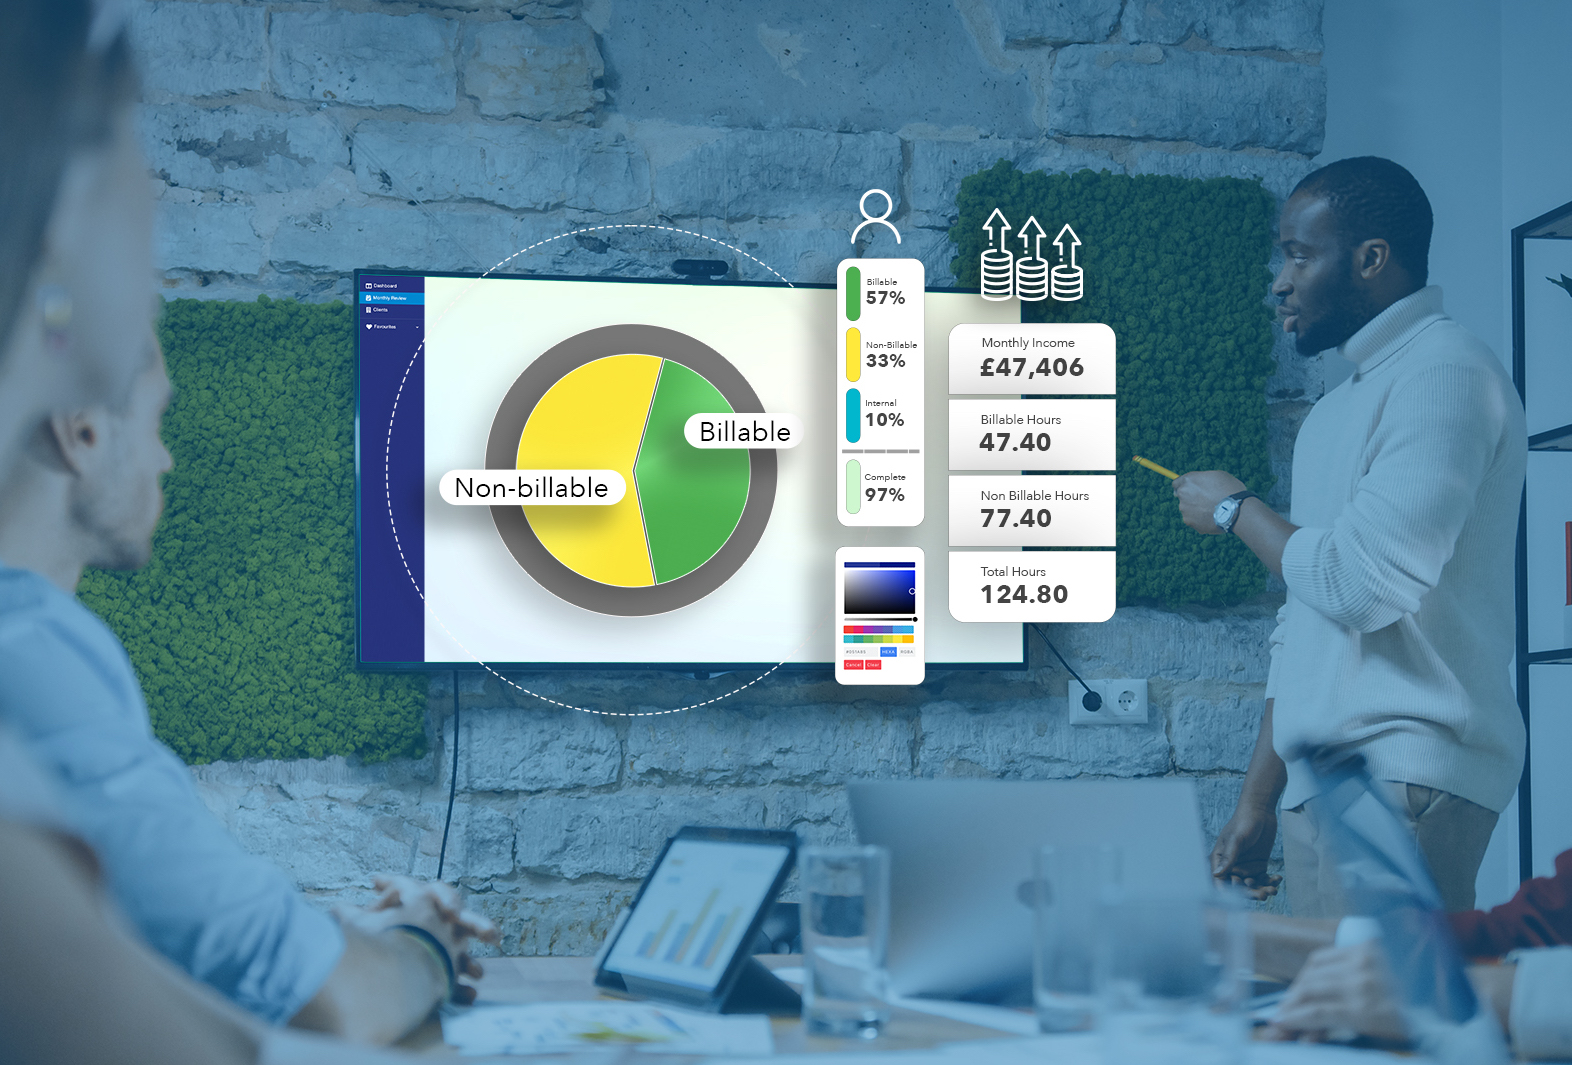 Image of a person presenting with an overlay showing screenshots of a billable/non-billable graph and top-level figures breaking down project profitability